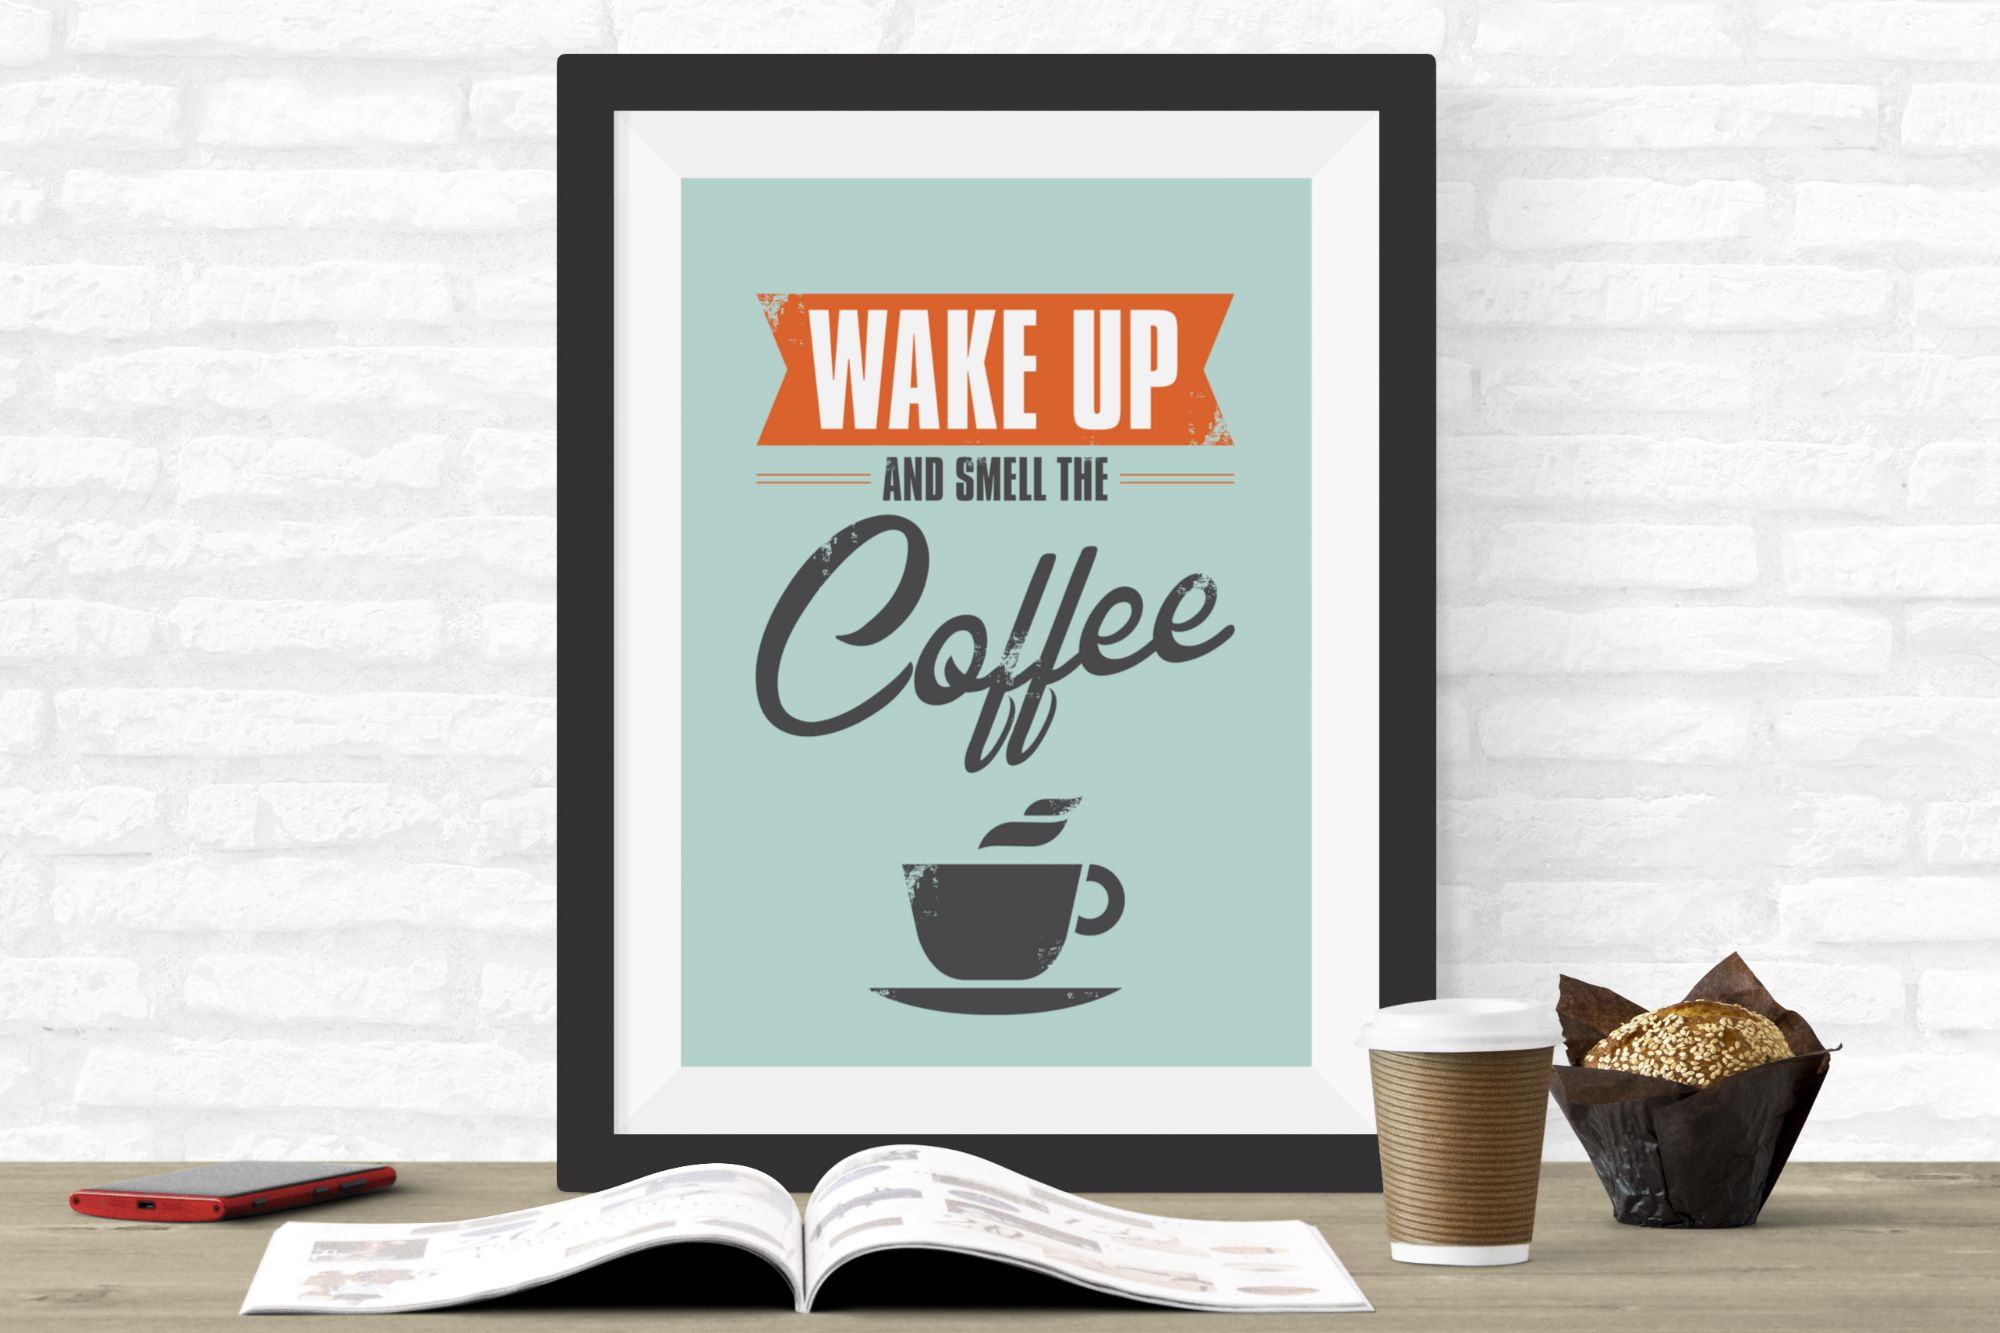 Wake-up-and-smell-the-coffee-3x2-darken